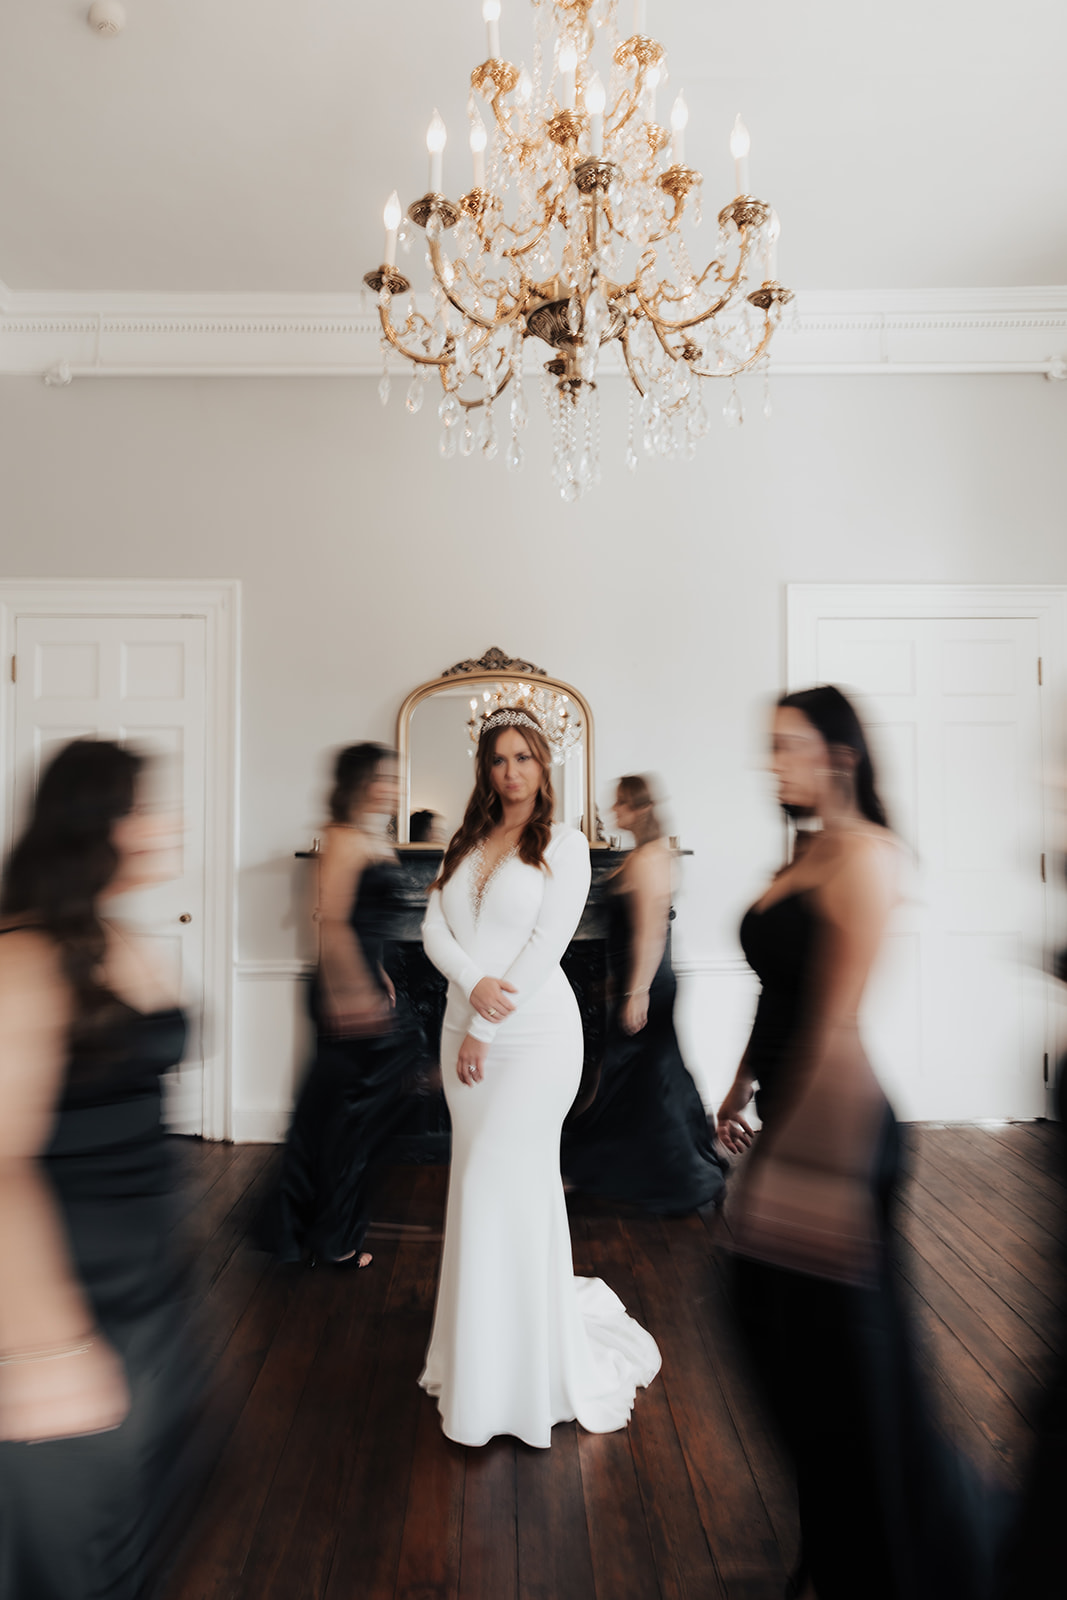 Artsy wedding photographer style captured bride in focus standing in middle of room surrounded by bridesmaids in black dresses all out of focus